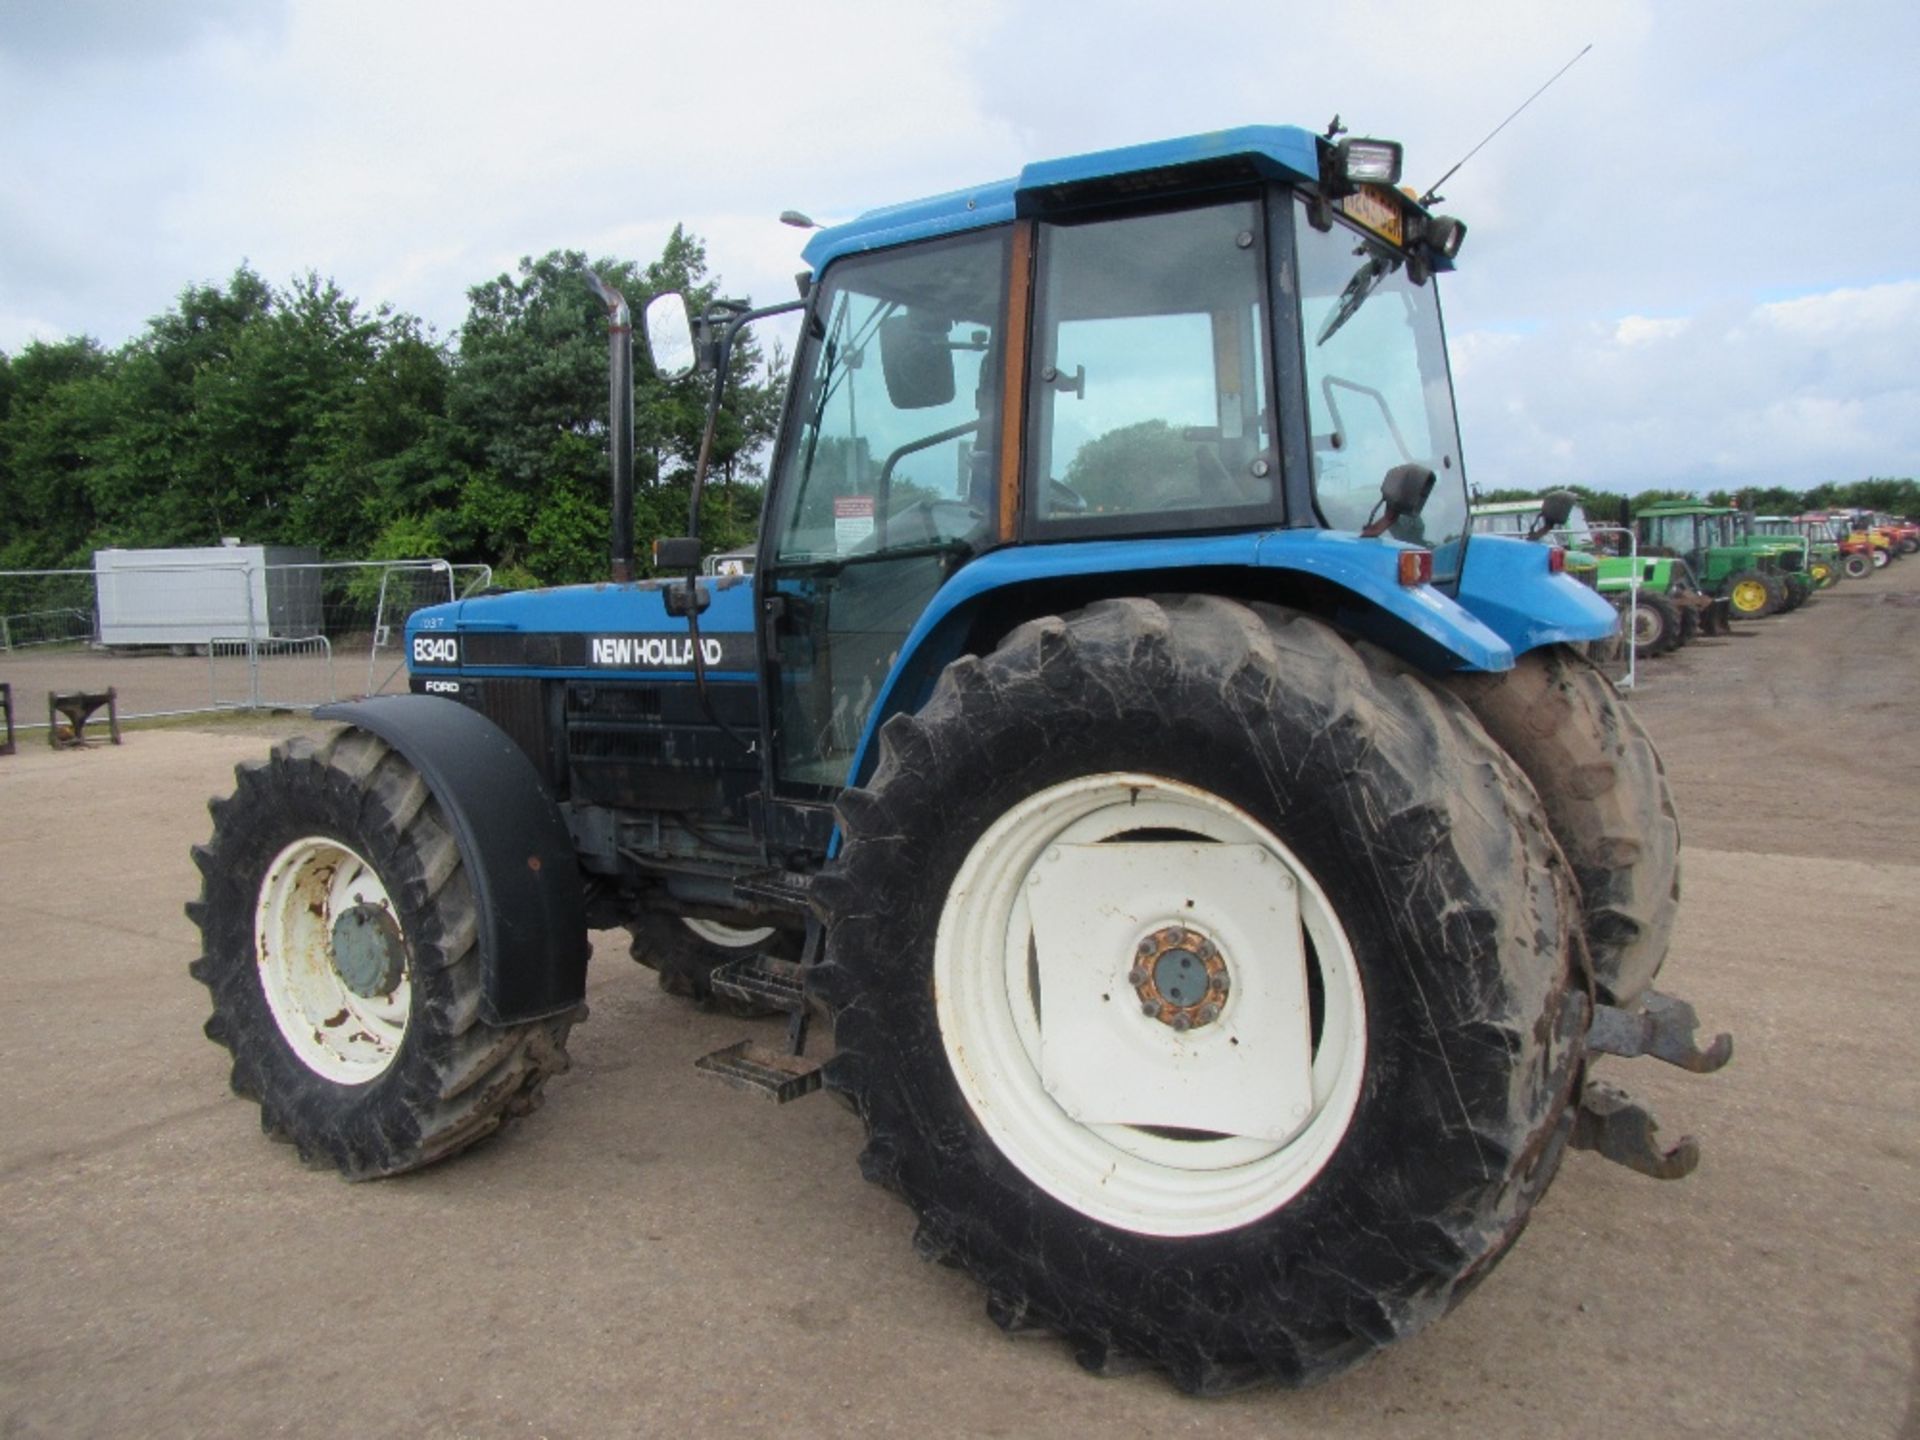 New Holland 8340 SLE 4wd Tractor Reg. No. N243 SCN Ser. No. 025324B - Image 20 of 20